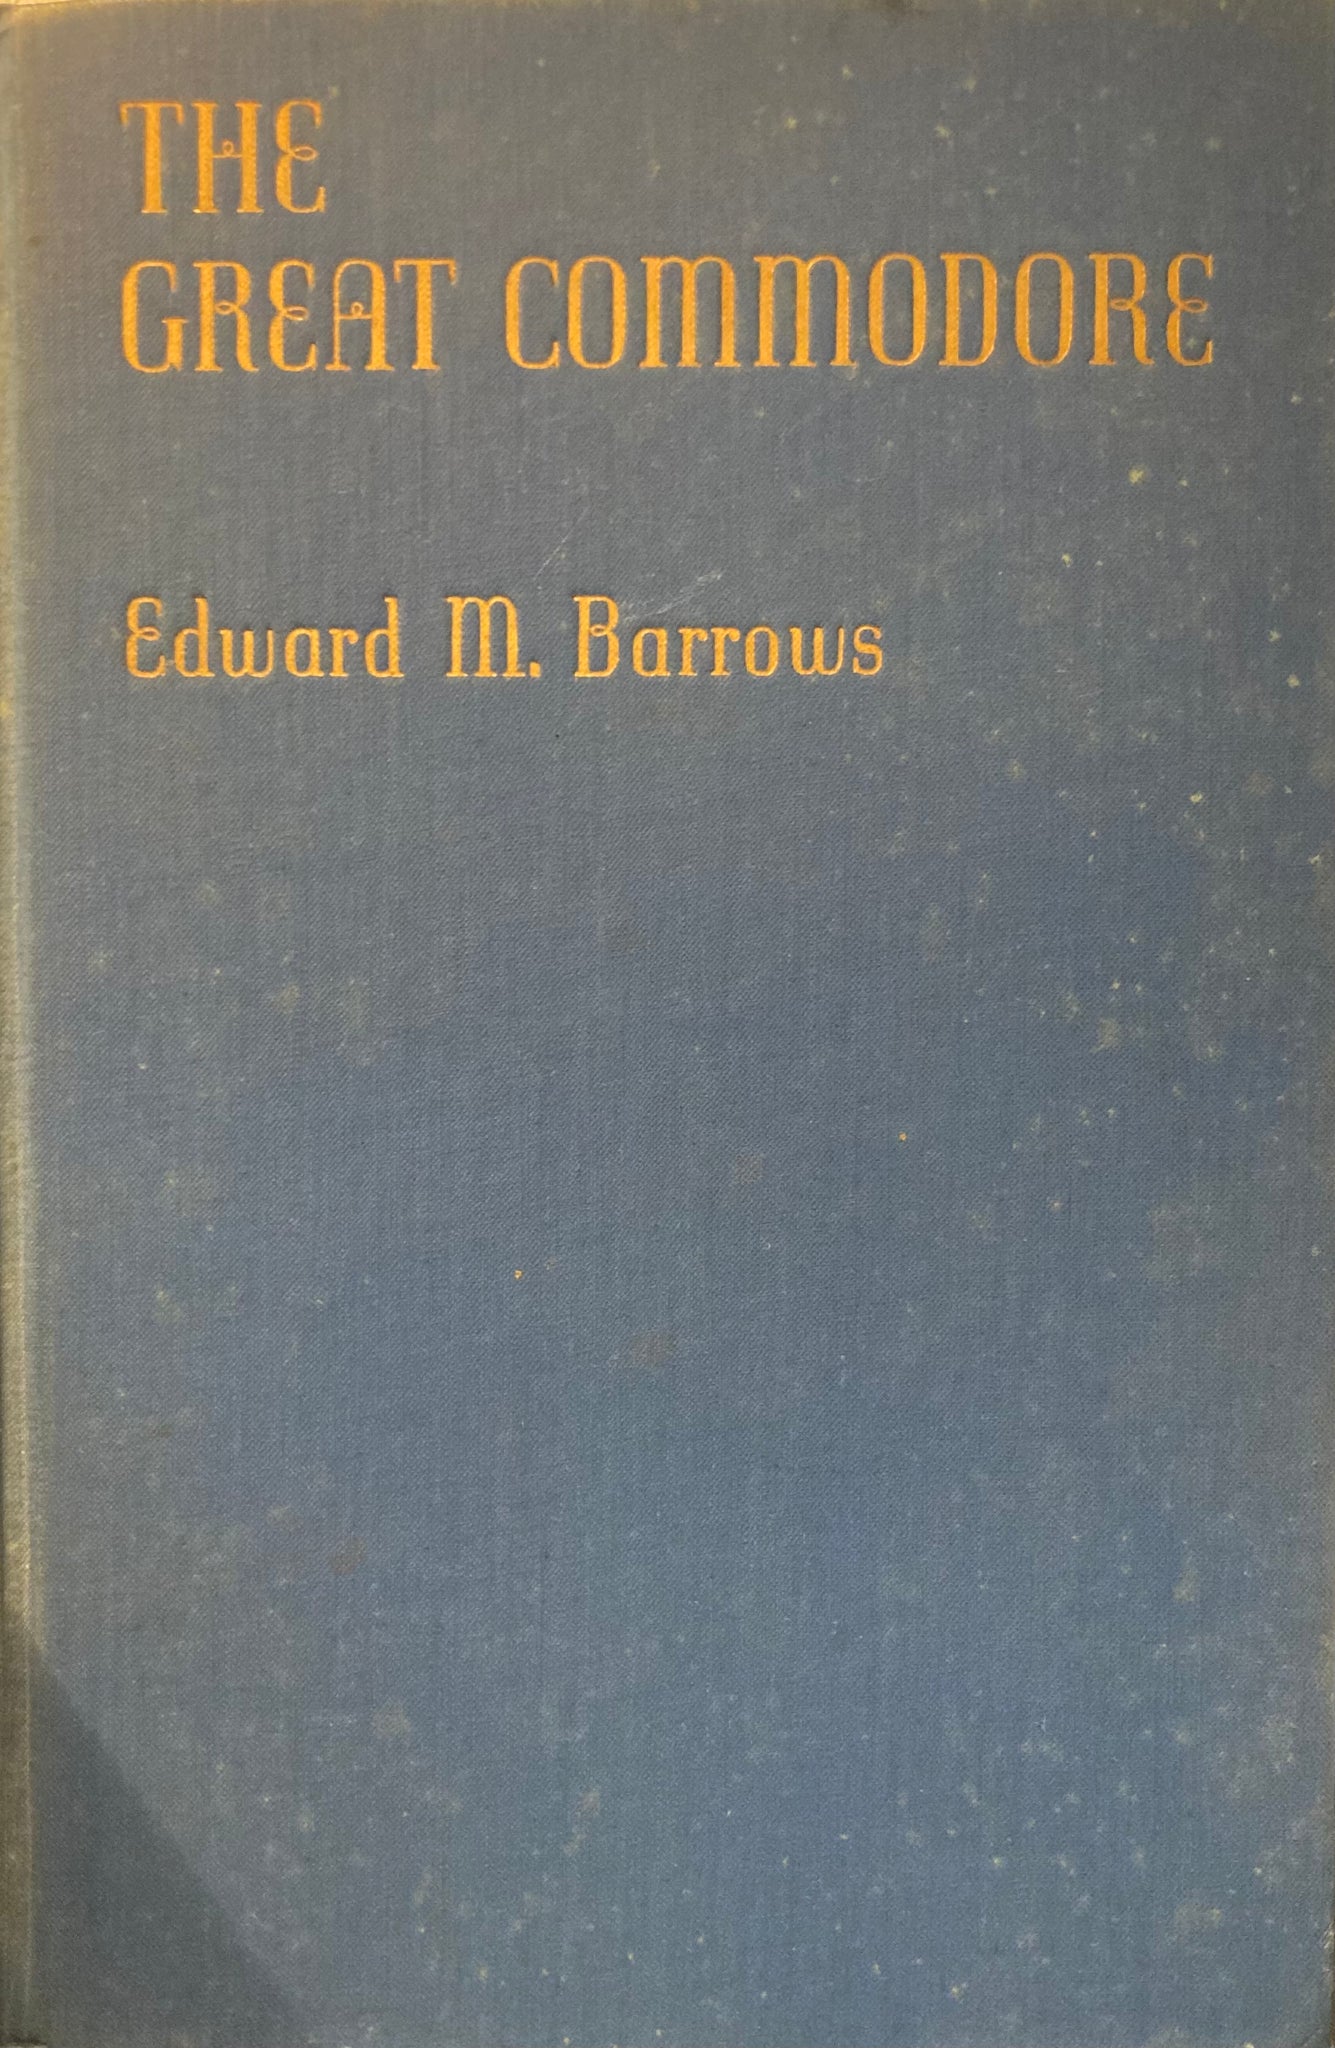 The Great Commodore - First Edition